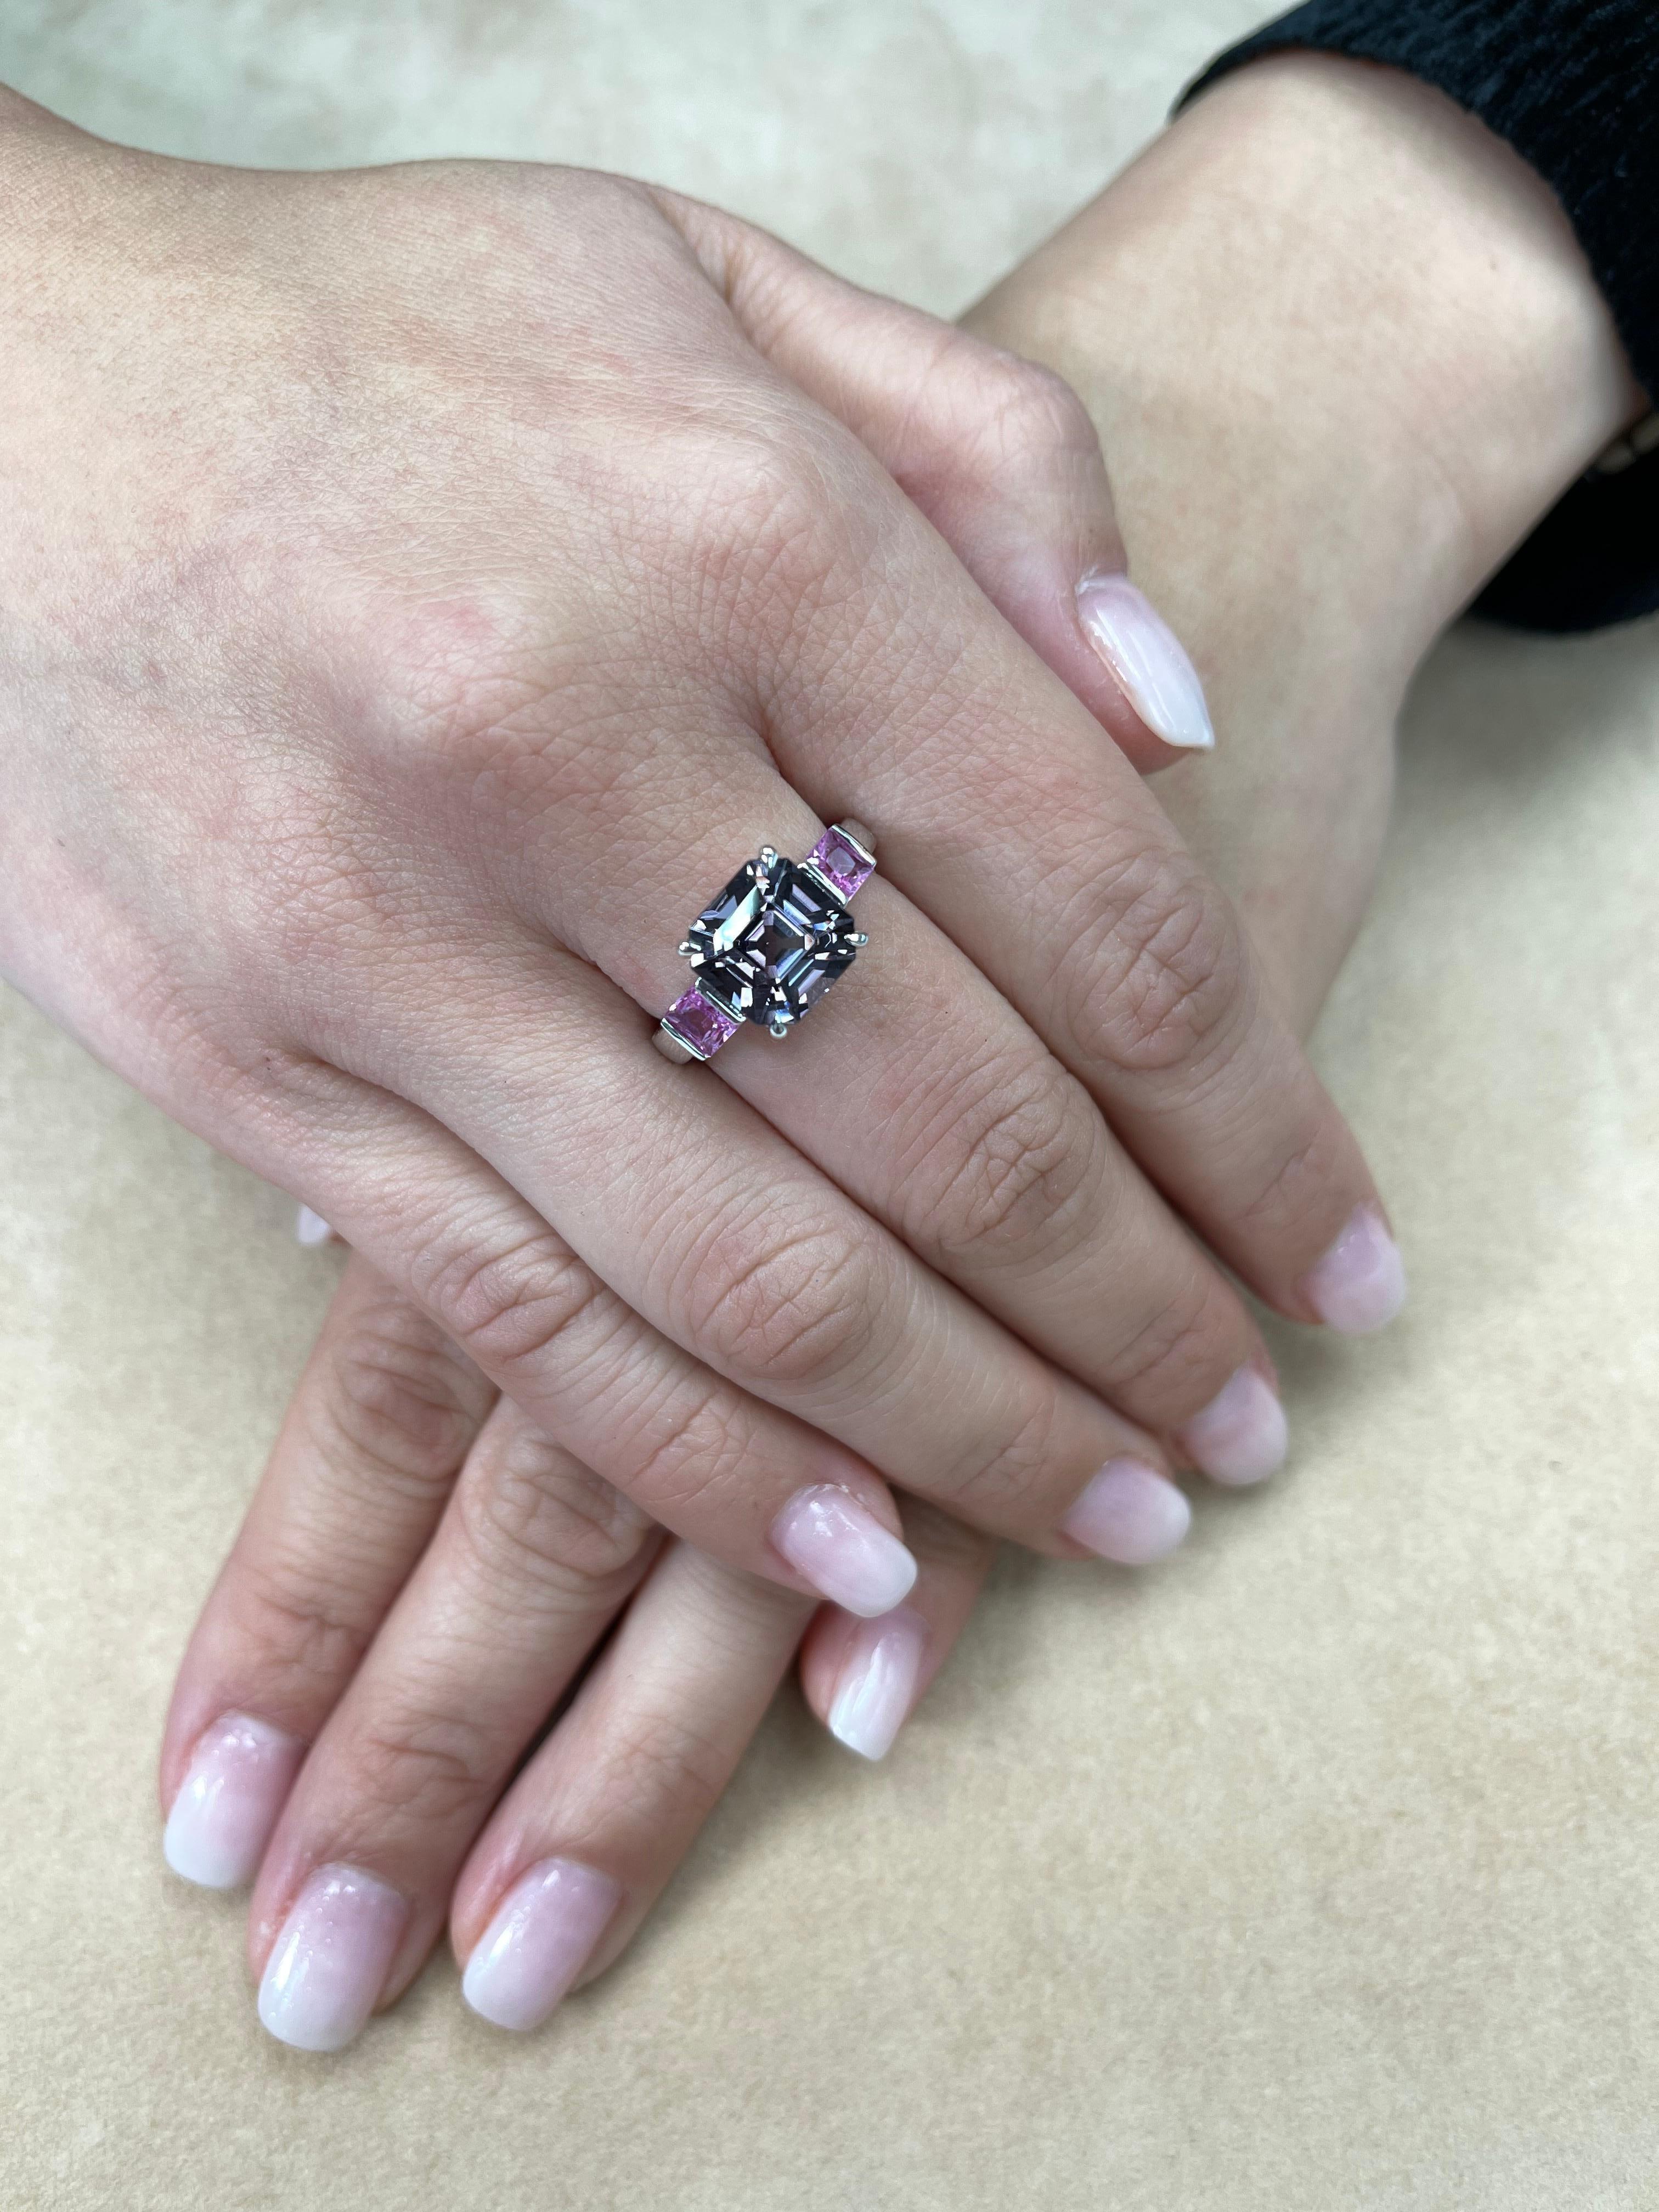 A unique color combination. Here is a superb Asscher cut Spinel and hot pink sapphire 3 stone cocktail ring. The ring is set in 18k white gold. The center Asscher cut purple spinel is 4.28 cts. The Natural Spinel is well cut. The color is crispy and